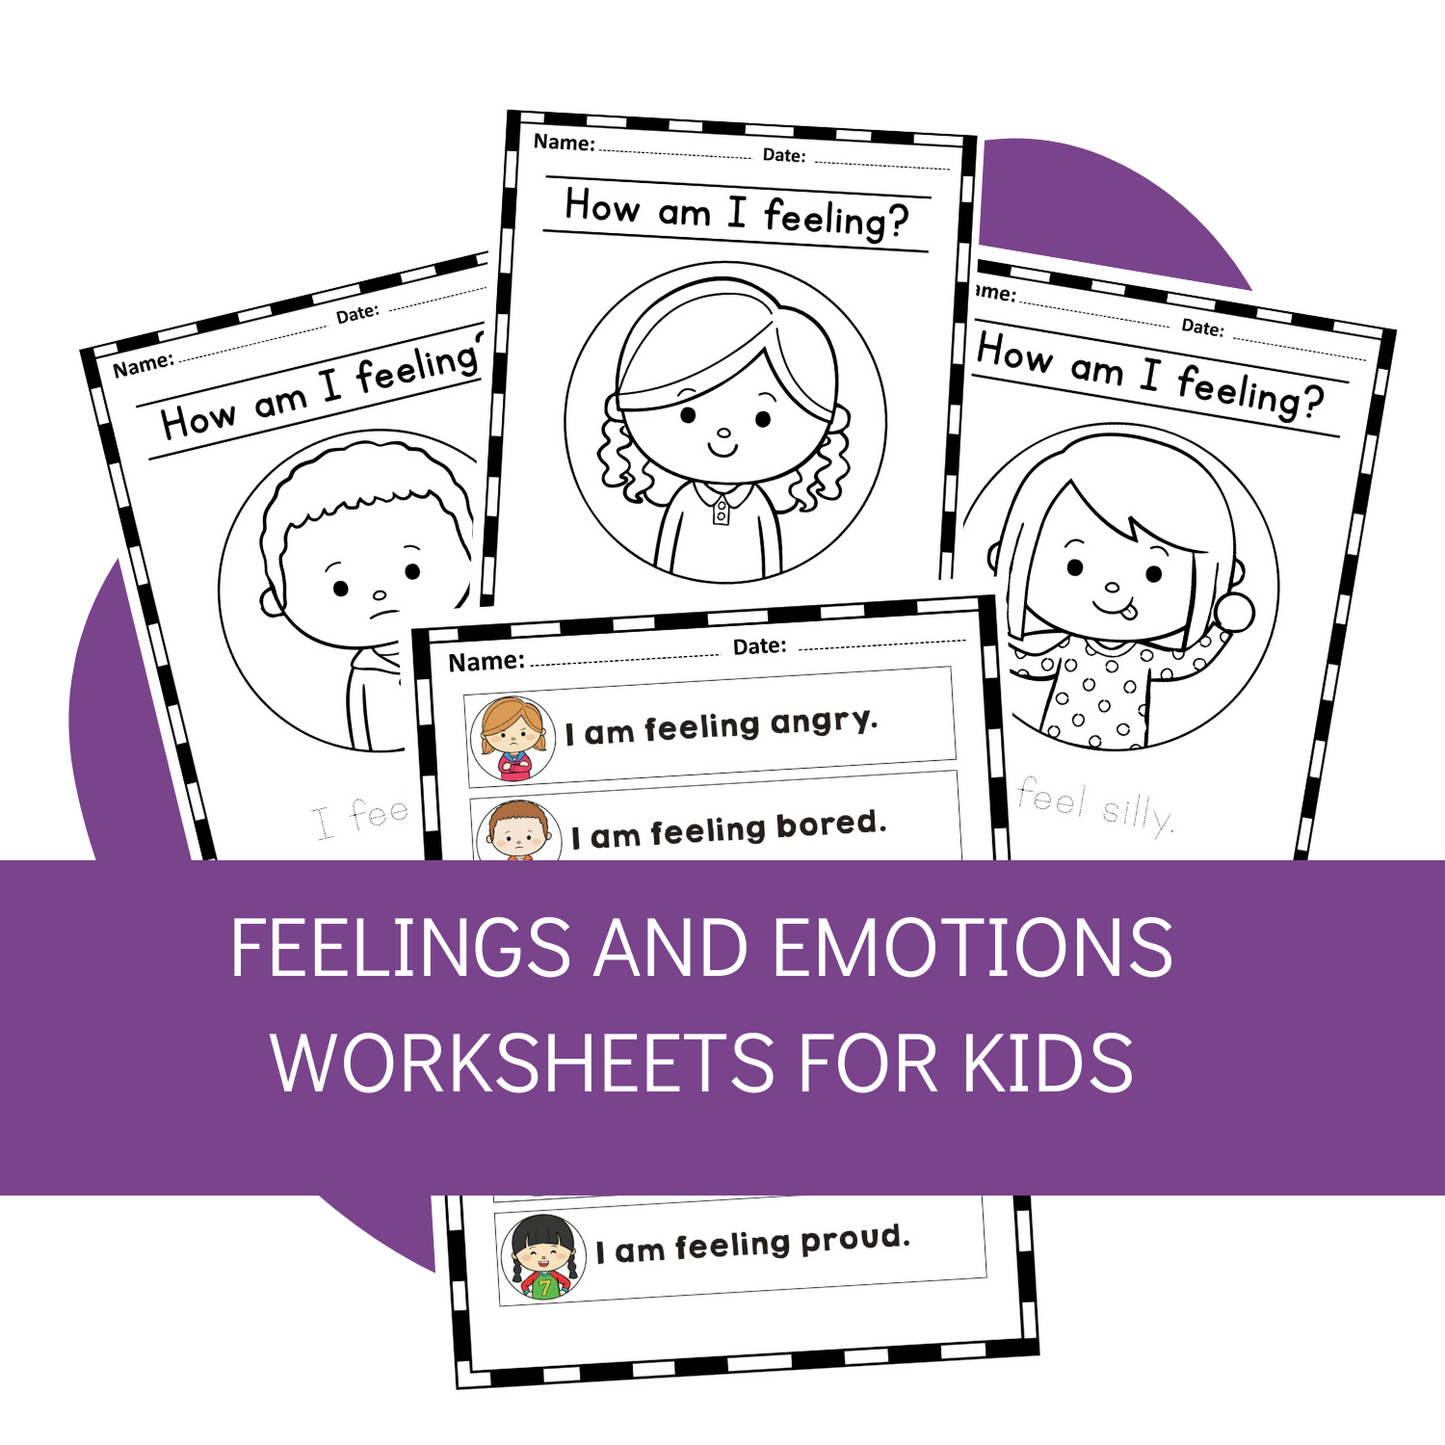 Feelings and Emotions Worksheets for Kids